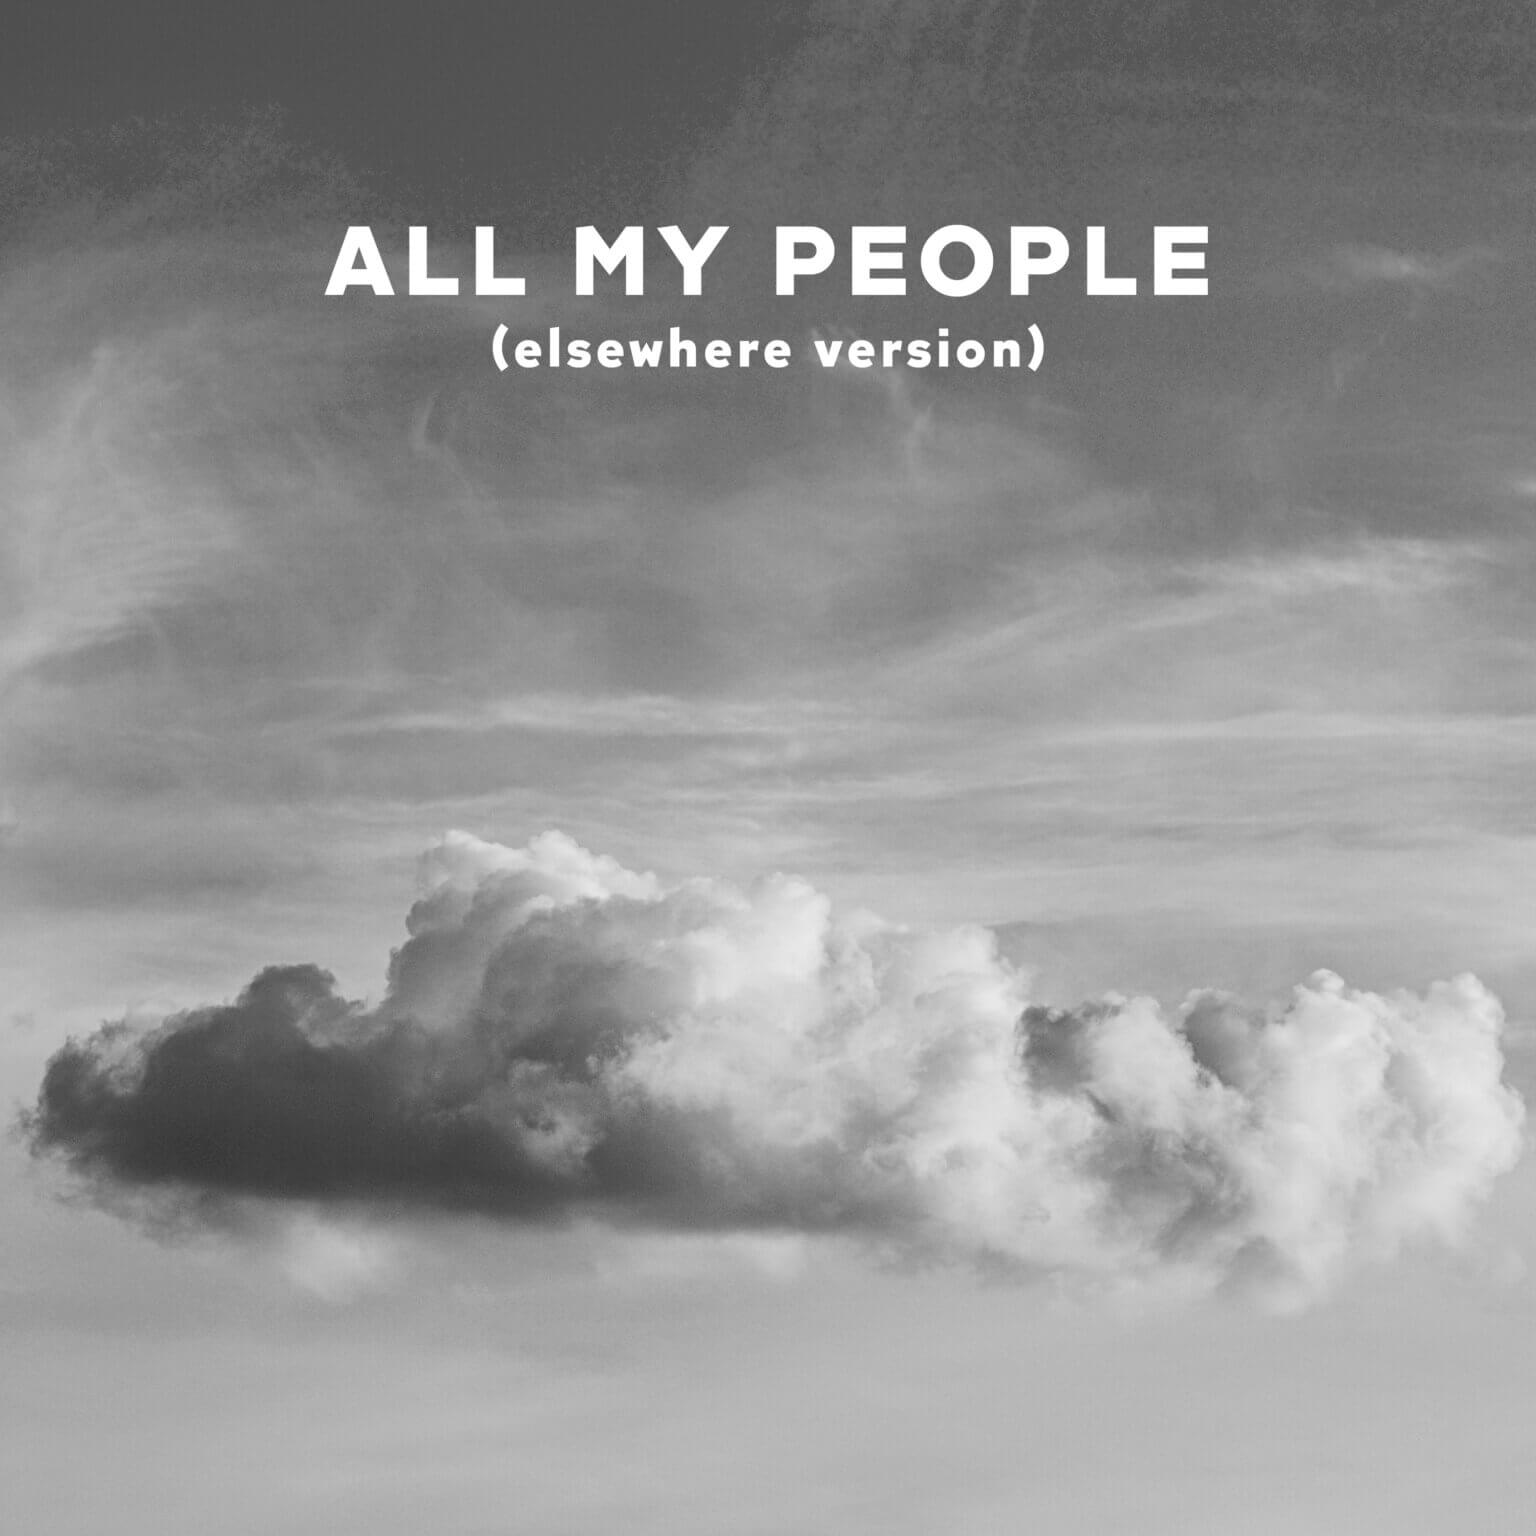 Dan Mangan shares the third reimagined track from the record. “All My People”